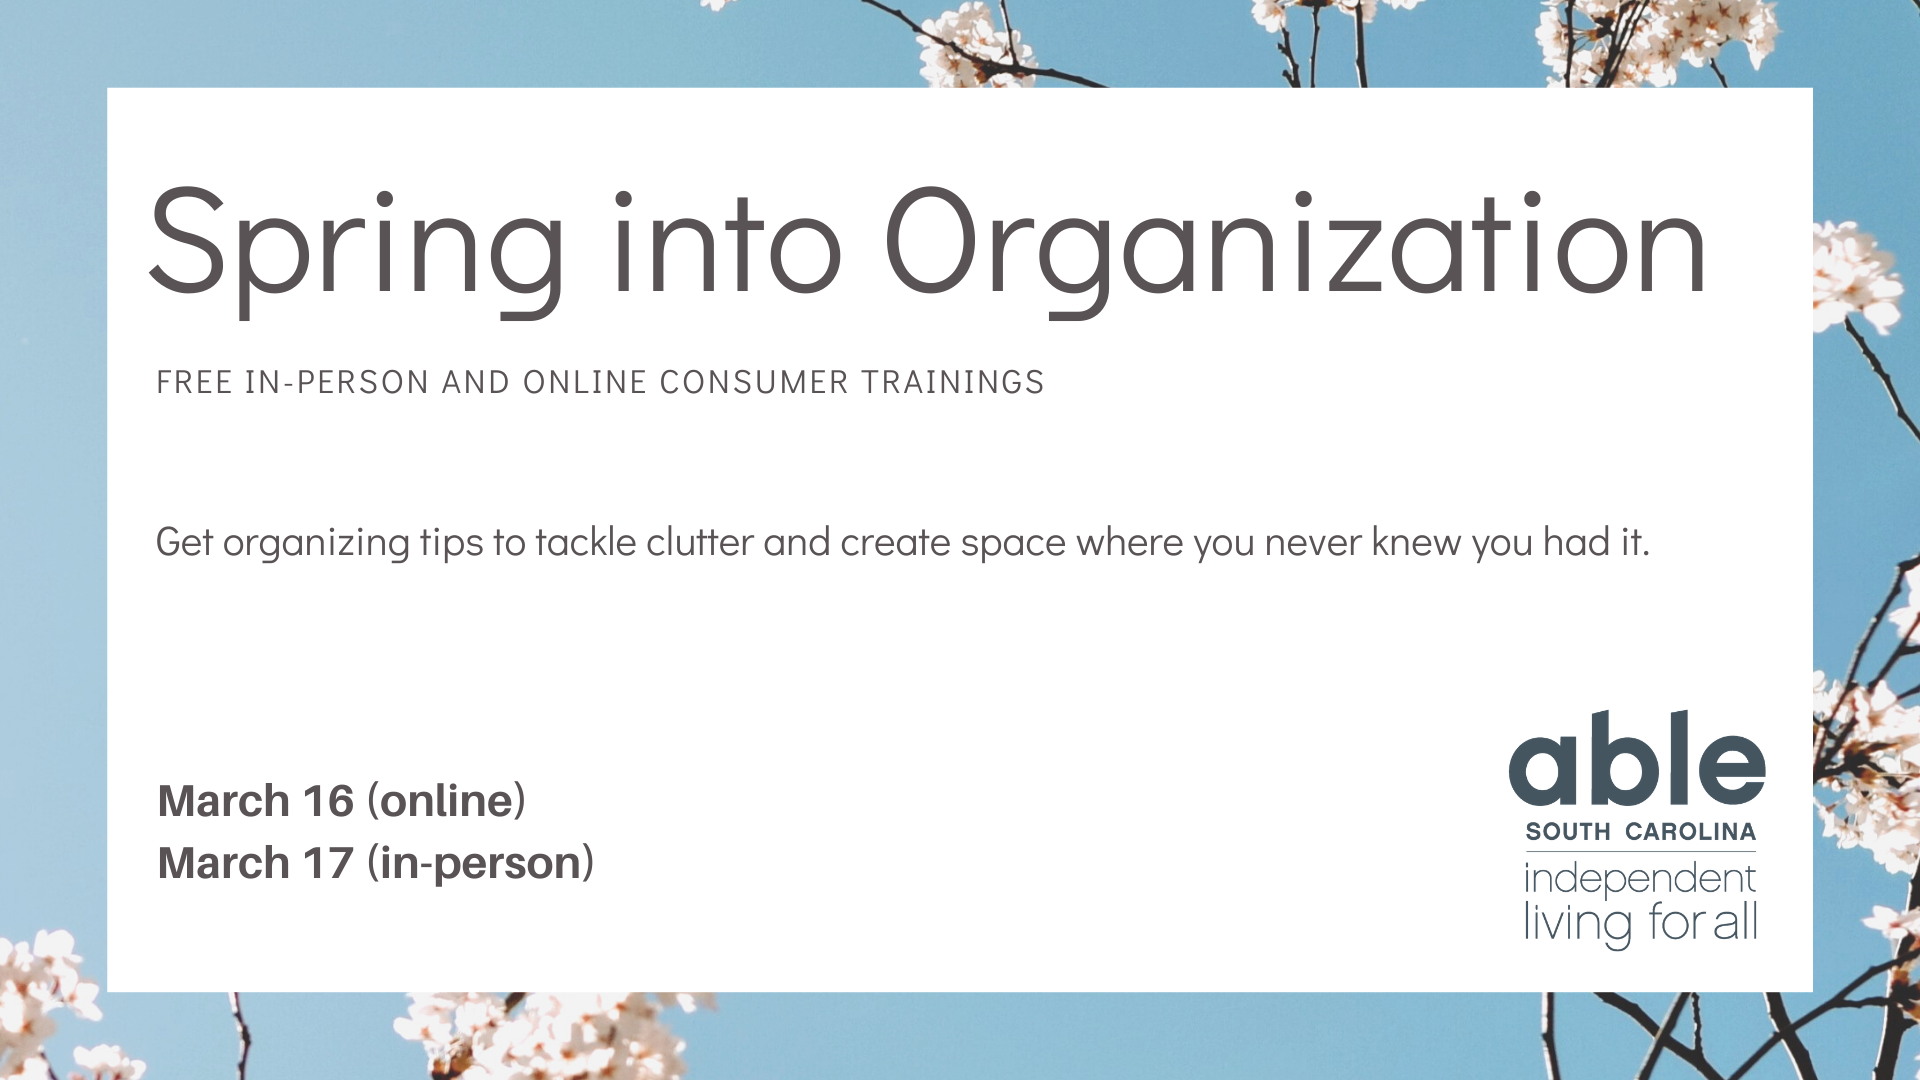 Graphic with a white square over a photo of flowers on a blue background. Black text on the square says “Spring into Organization. Free in-person and online consumer trainings. Get organizing tips to tackle clutter and create space where you never knew you had it. March 16 (online) and March 17 (in-person). The Able SC logo is in the bottom right corner.